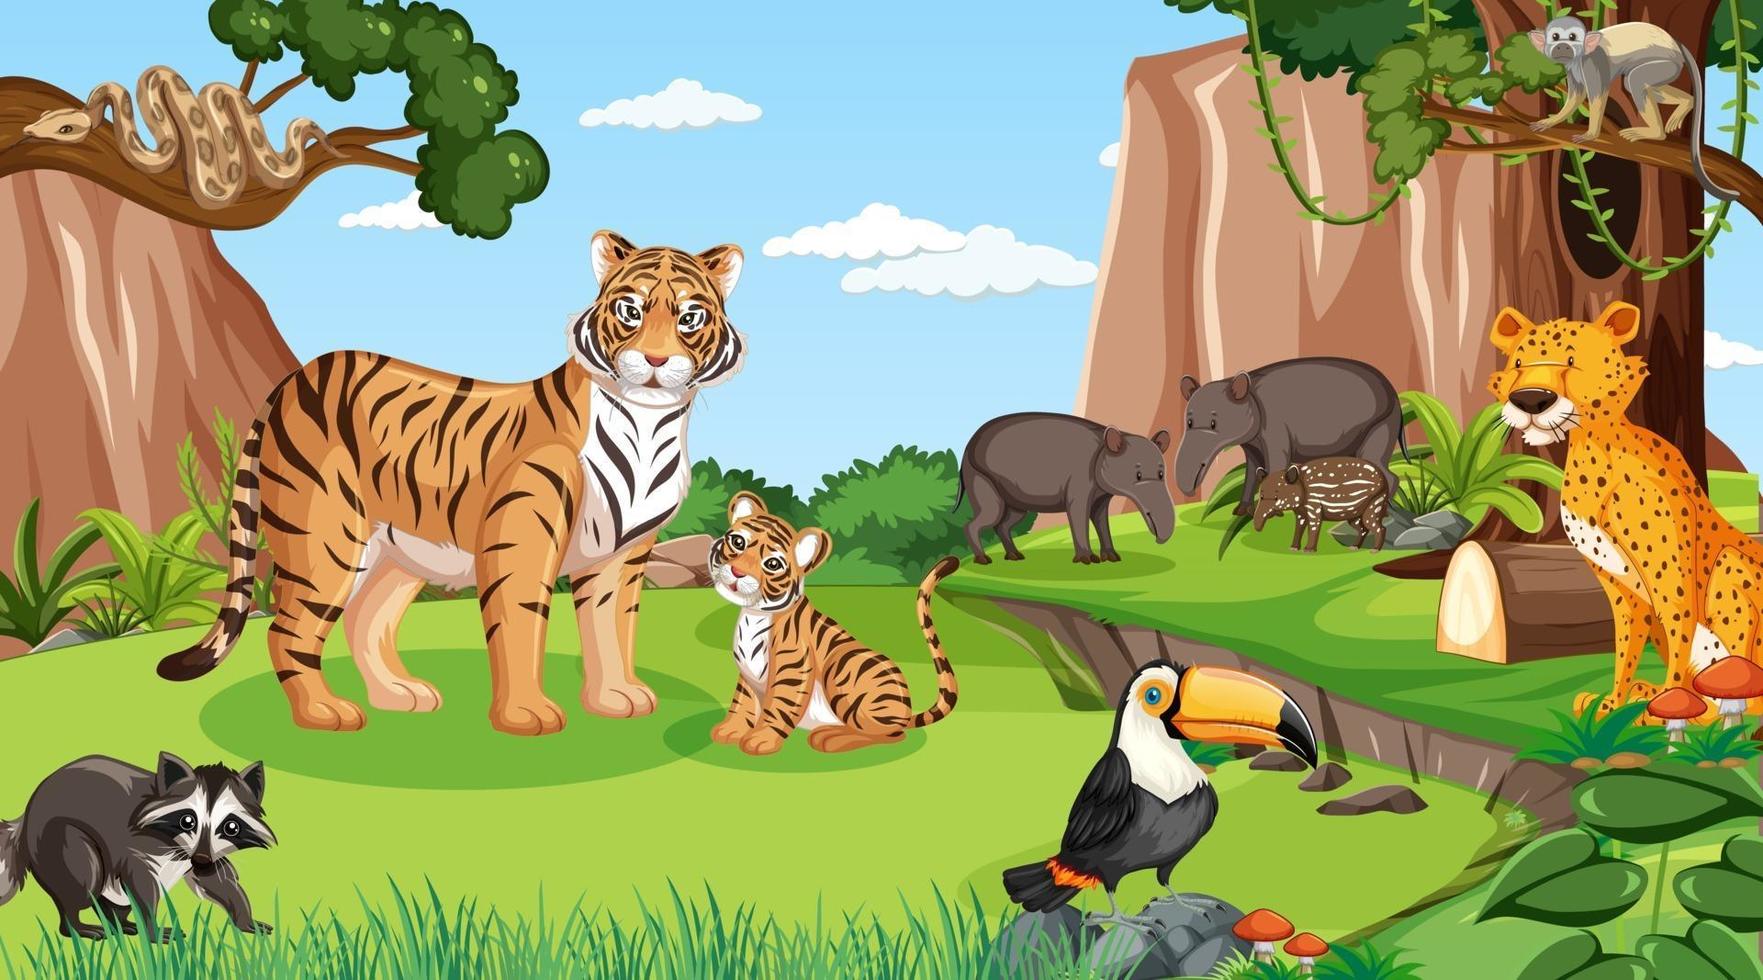 Wild animals in forest scene with many trees vector